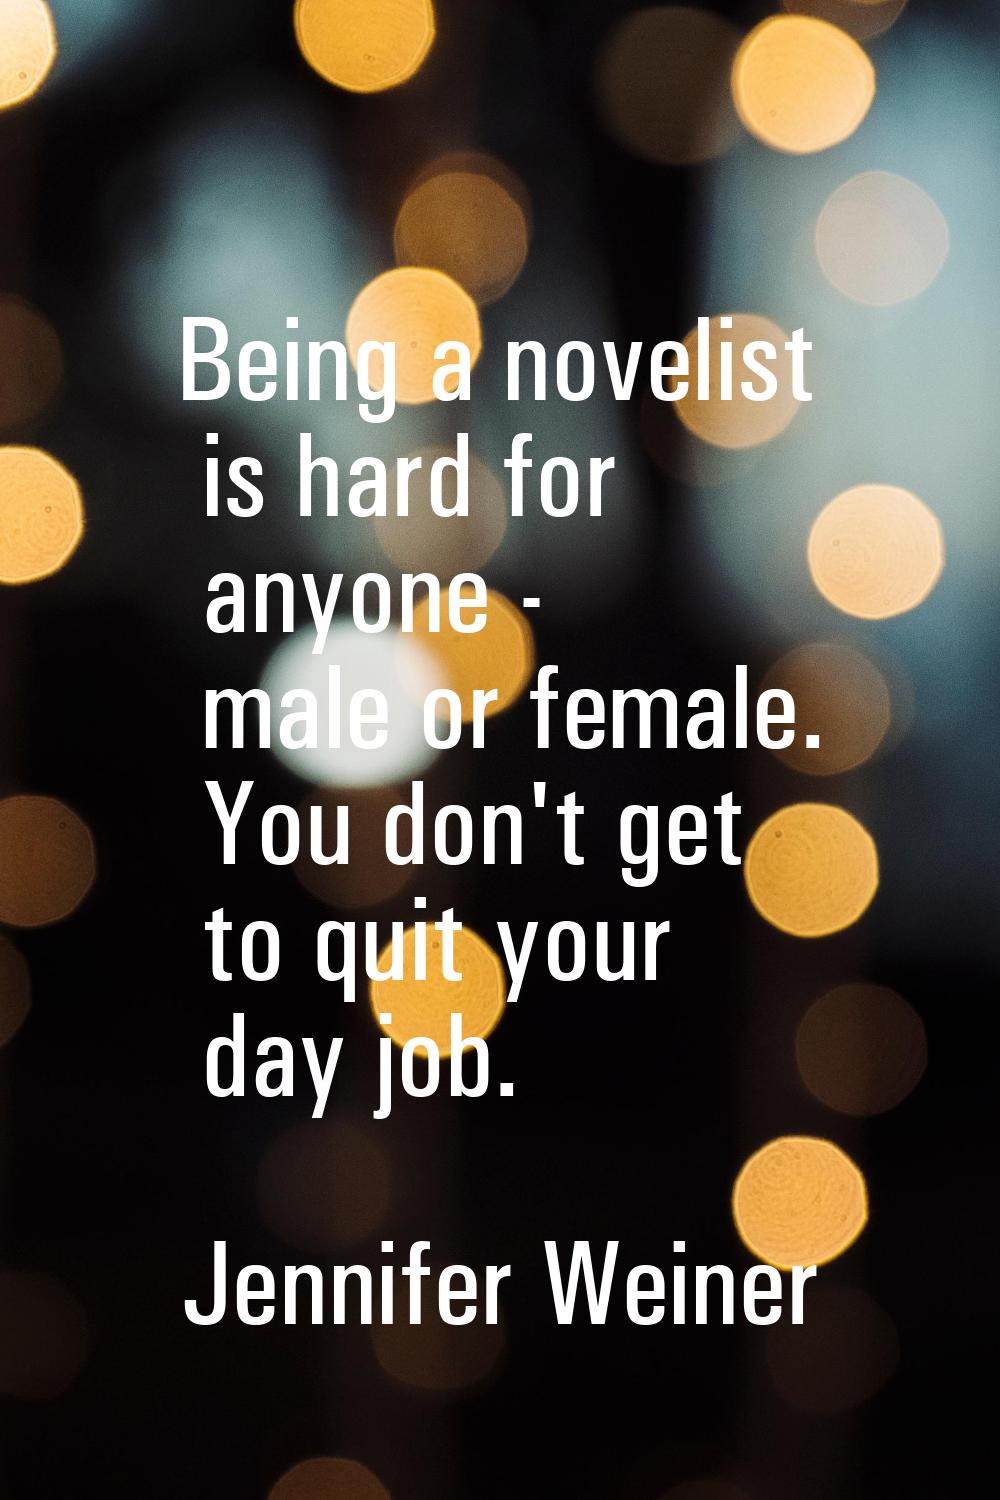 Being a novelist is hard for anyone - male or female. You don't get to quit your day job.